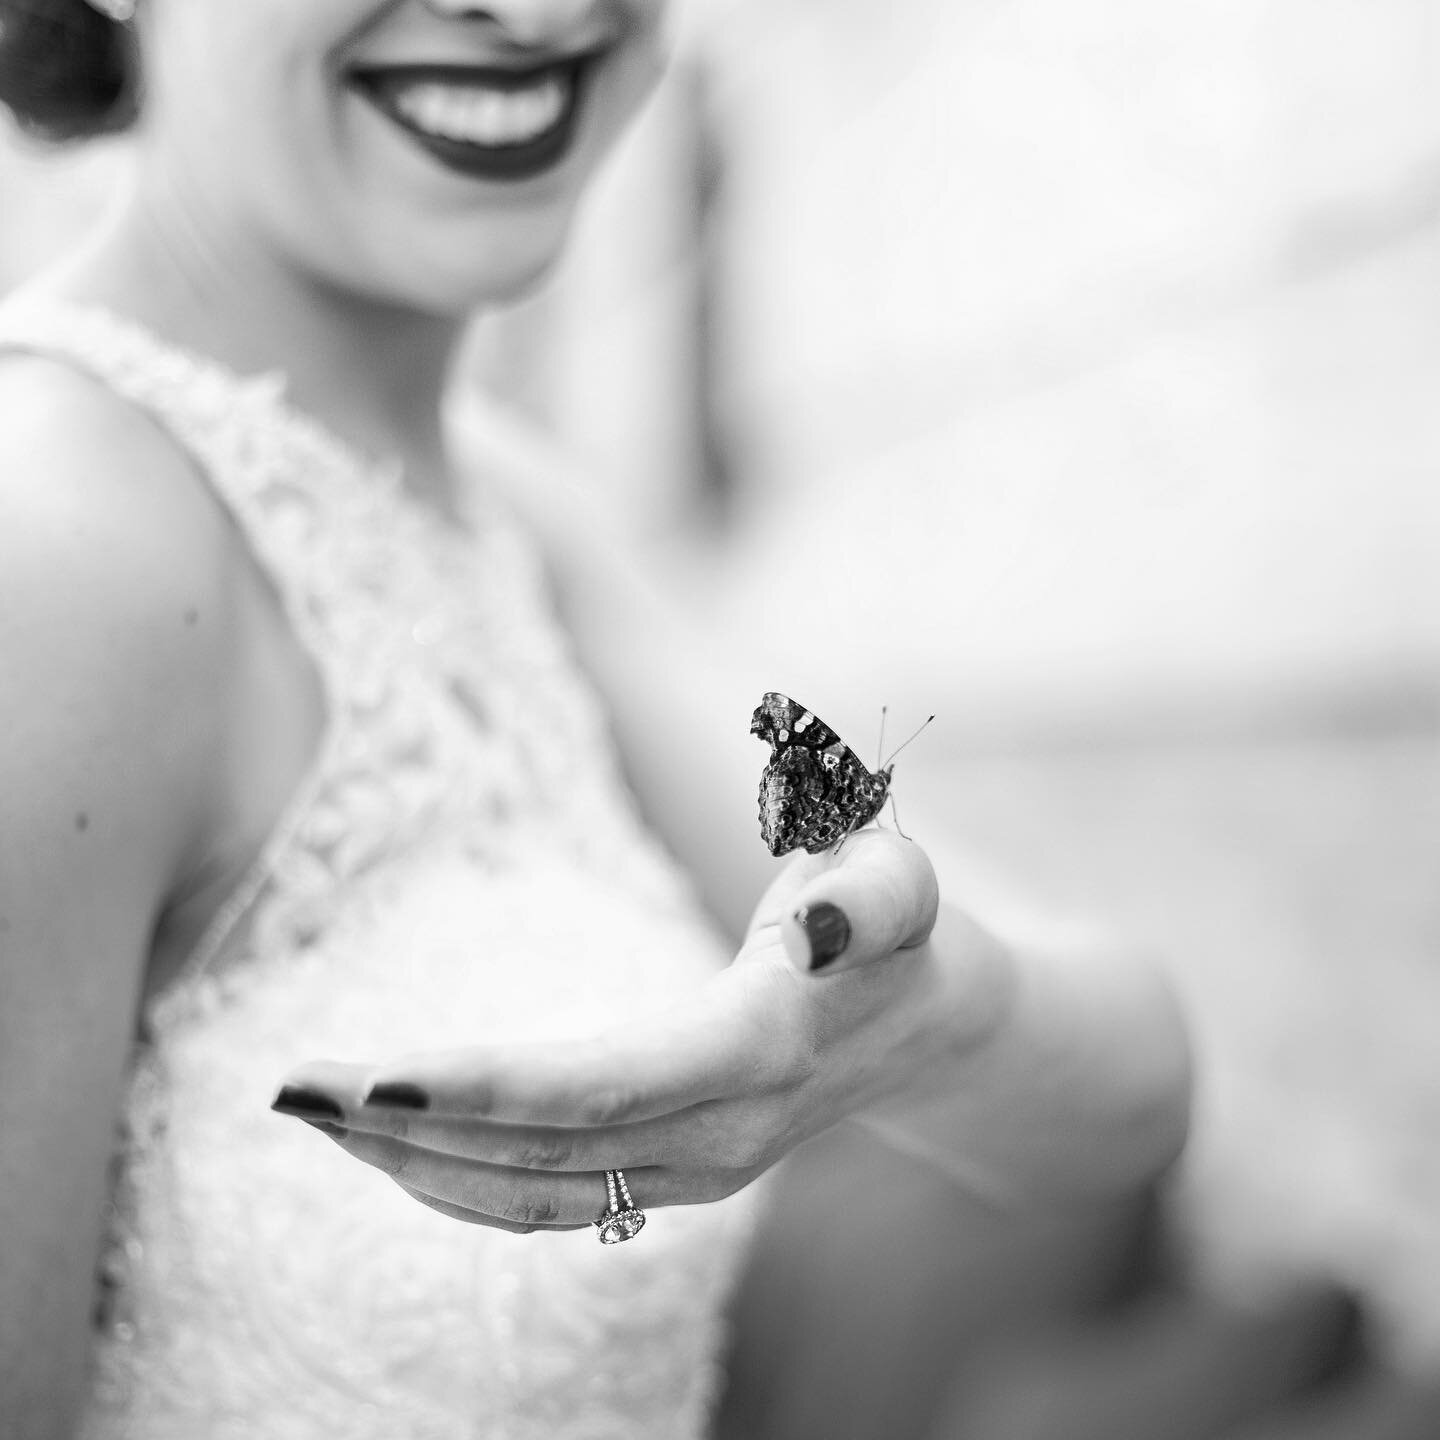 🦋 They say a butterfly on your wedding day is a sign of good luck! Would you believe me if I told you this little guy hiked up 30 stories? 
.
.
.
.
.
#NYCWedding #ManhattanWedding #TheSkylark #SkylarkWedding #NYCWeddingPhotographer #WeddingInspo #Bu